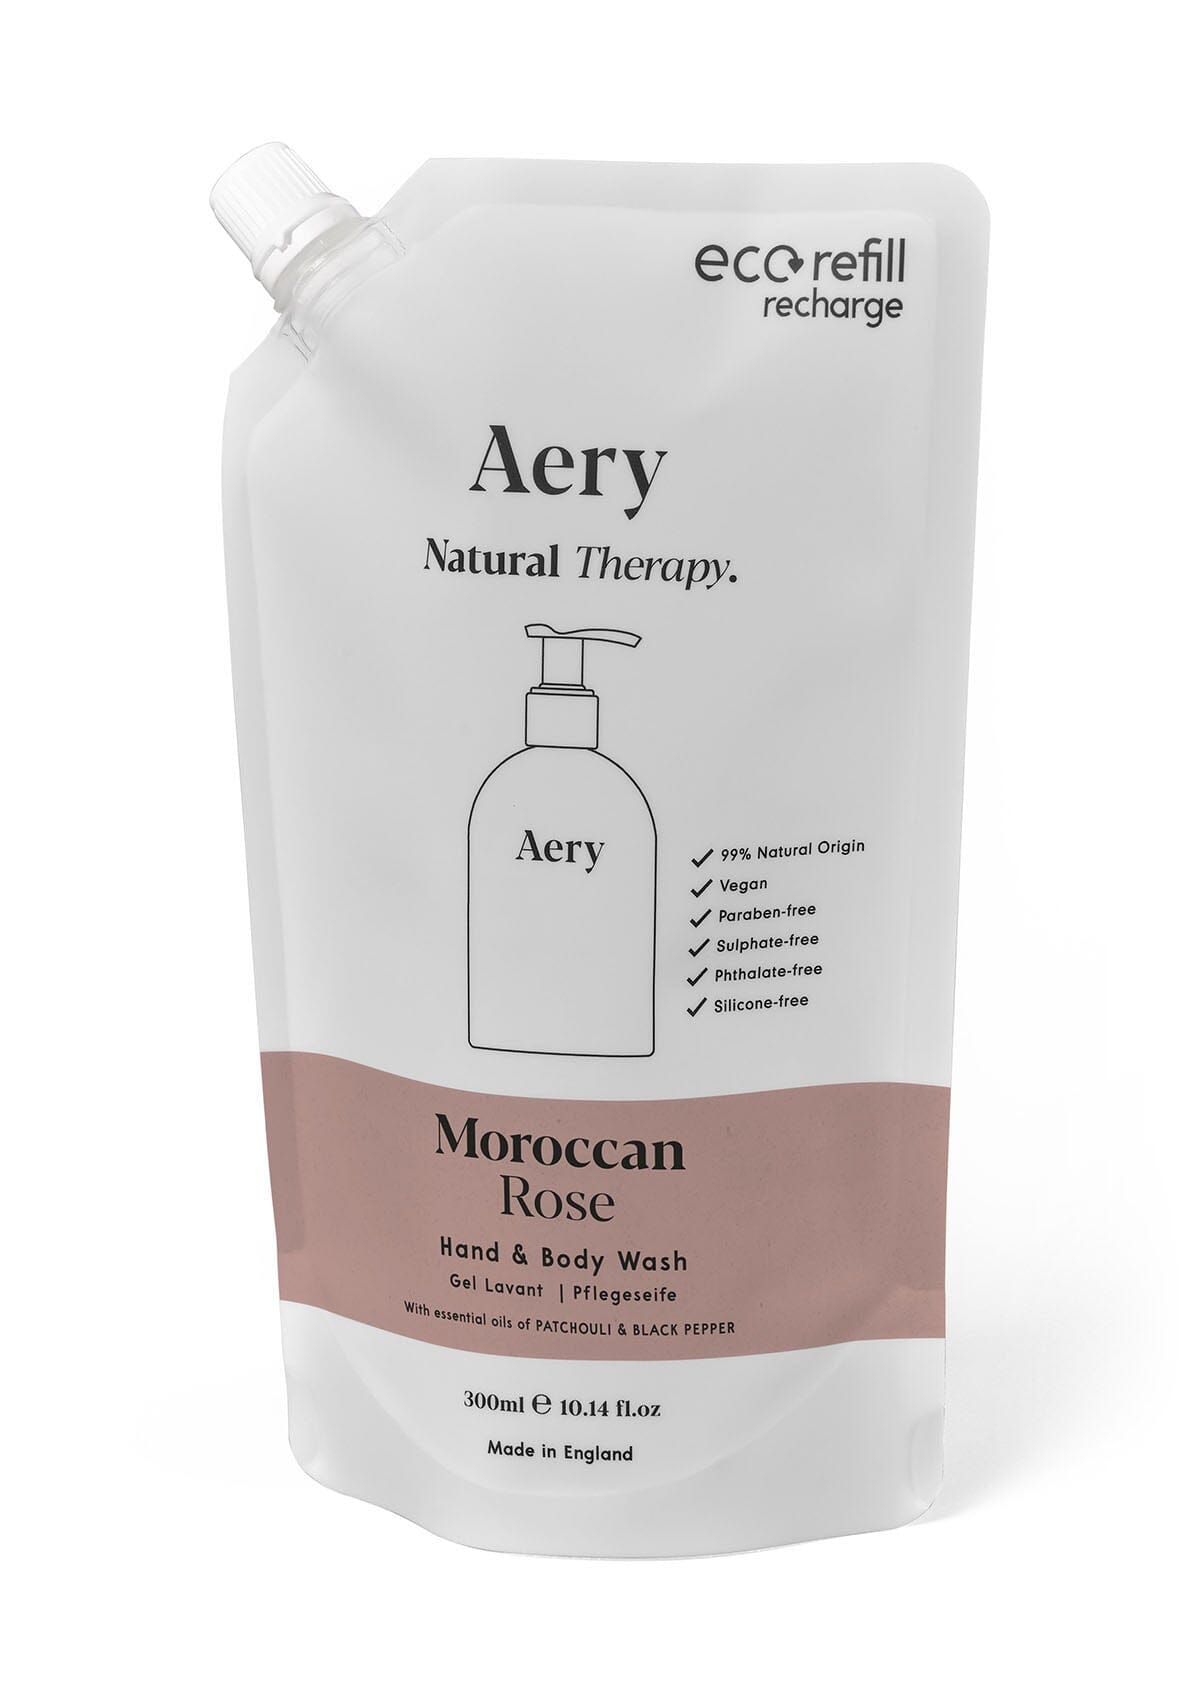 Aubergine Moroccan Rose hand and body wash refill pouch by aery displayed on white background 